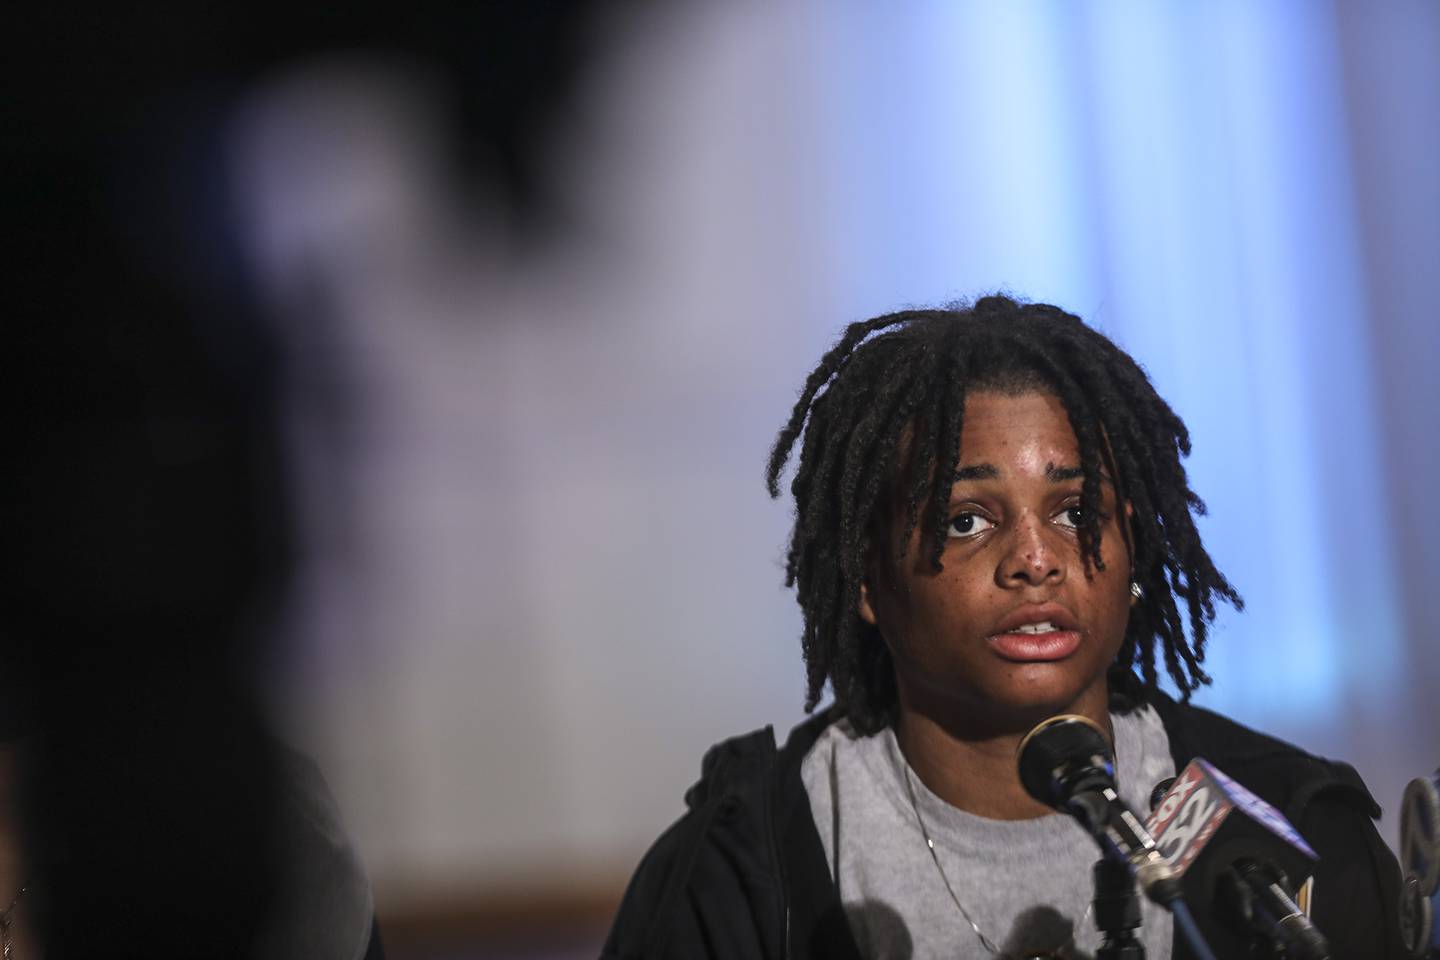 Jazzpher Evans speaks with reporters at a press conference on Thursday, April 8, 2021, at One Vision Worship Center in Joliet, Ill. Evans, a current Quincy University student and Joliet West High School graduate was allegedly assaulted in a racially motivated attack on Sunday night at a local Quincy bar.